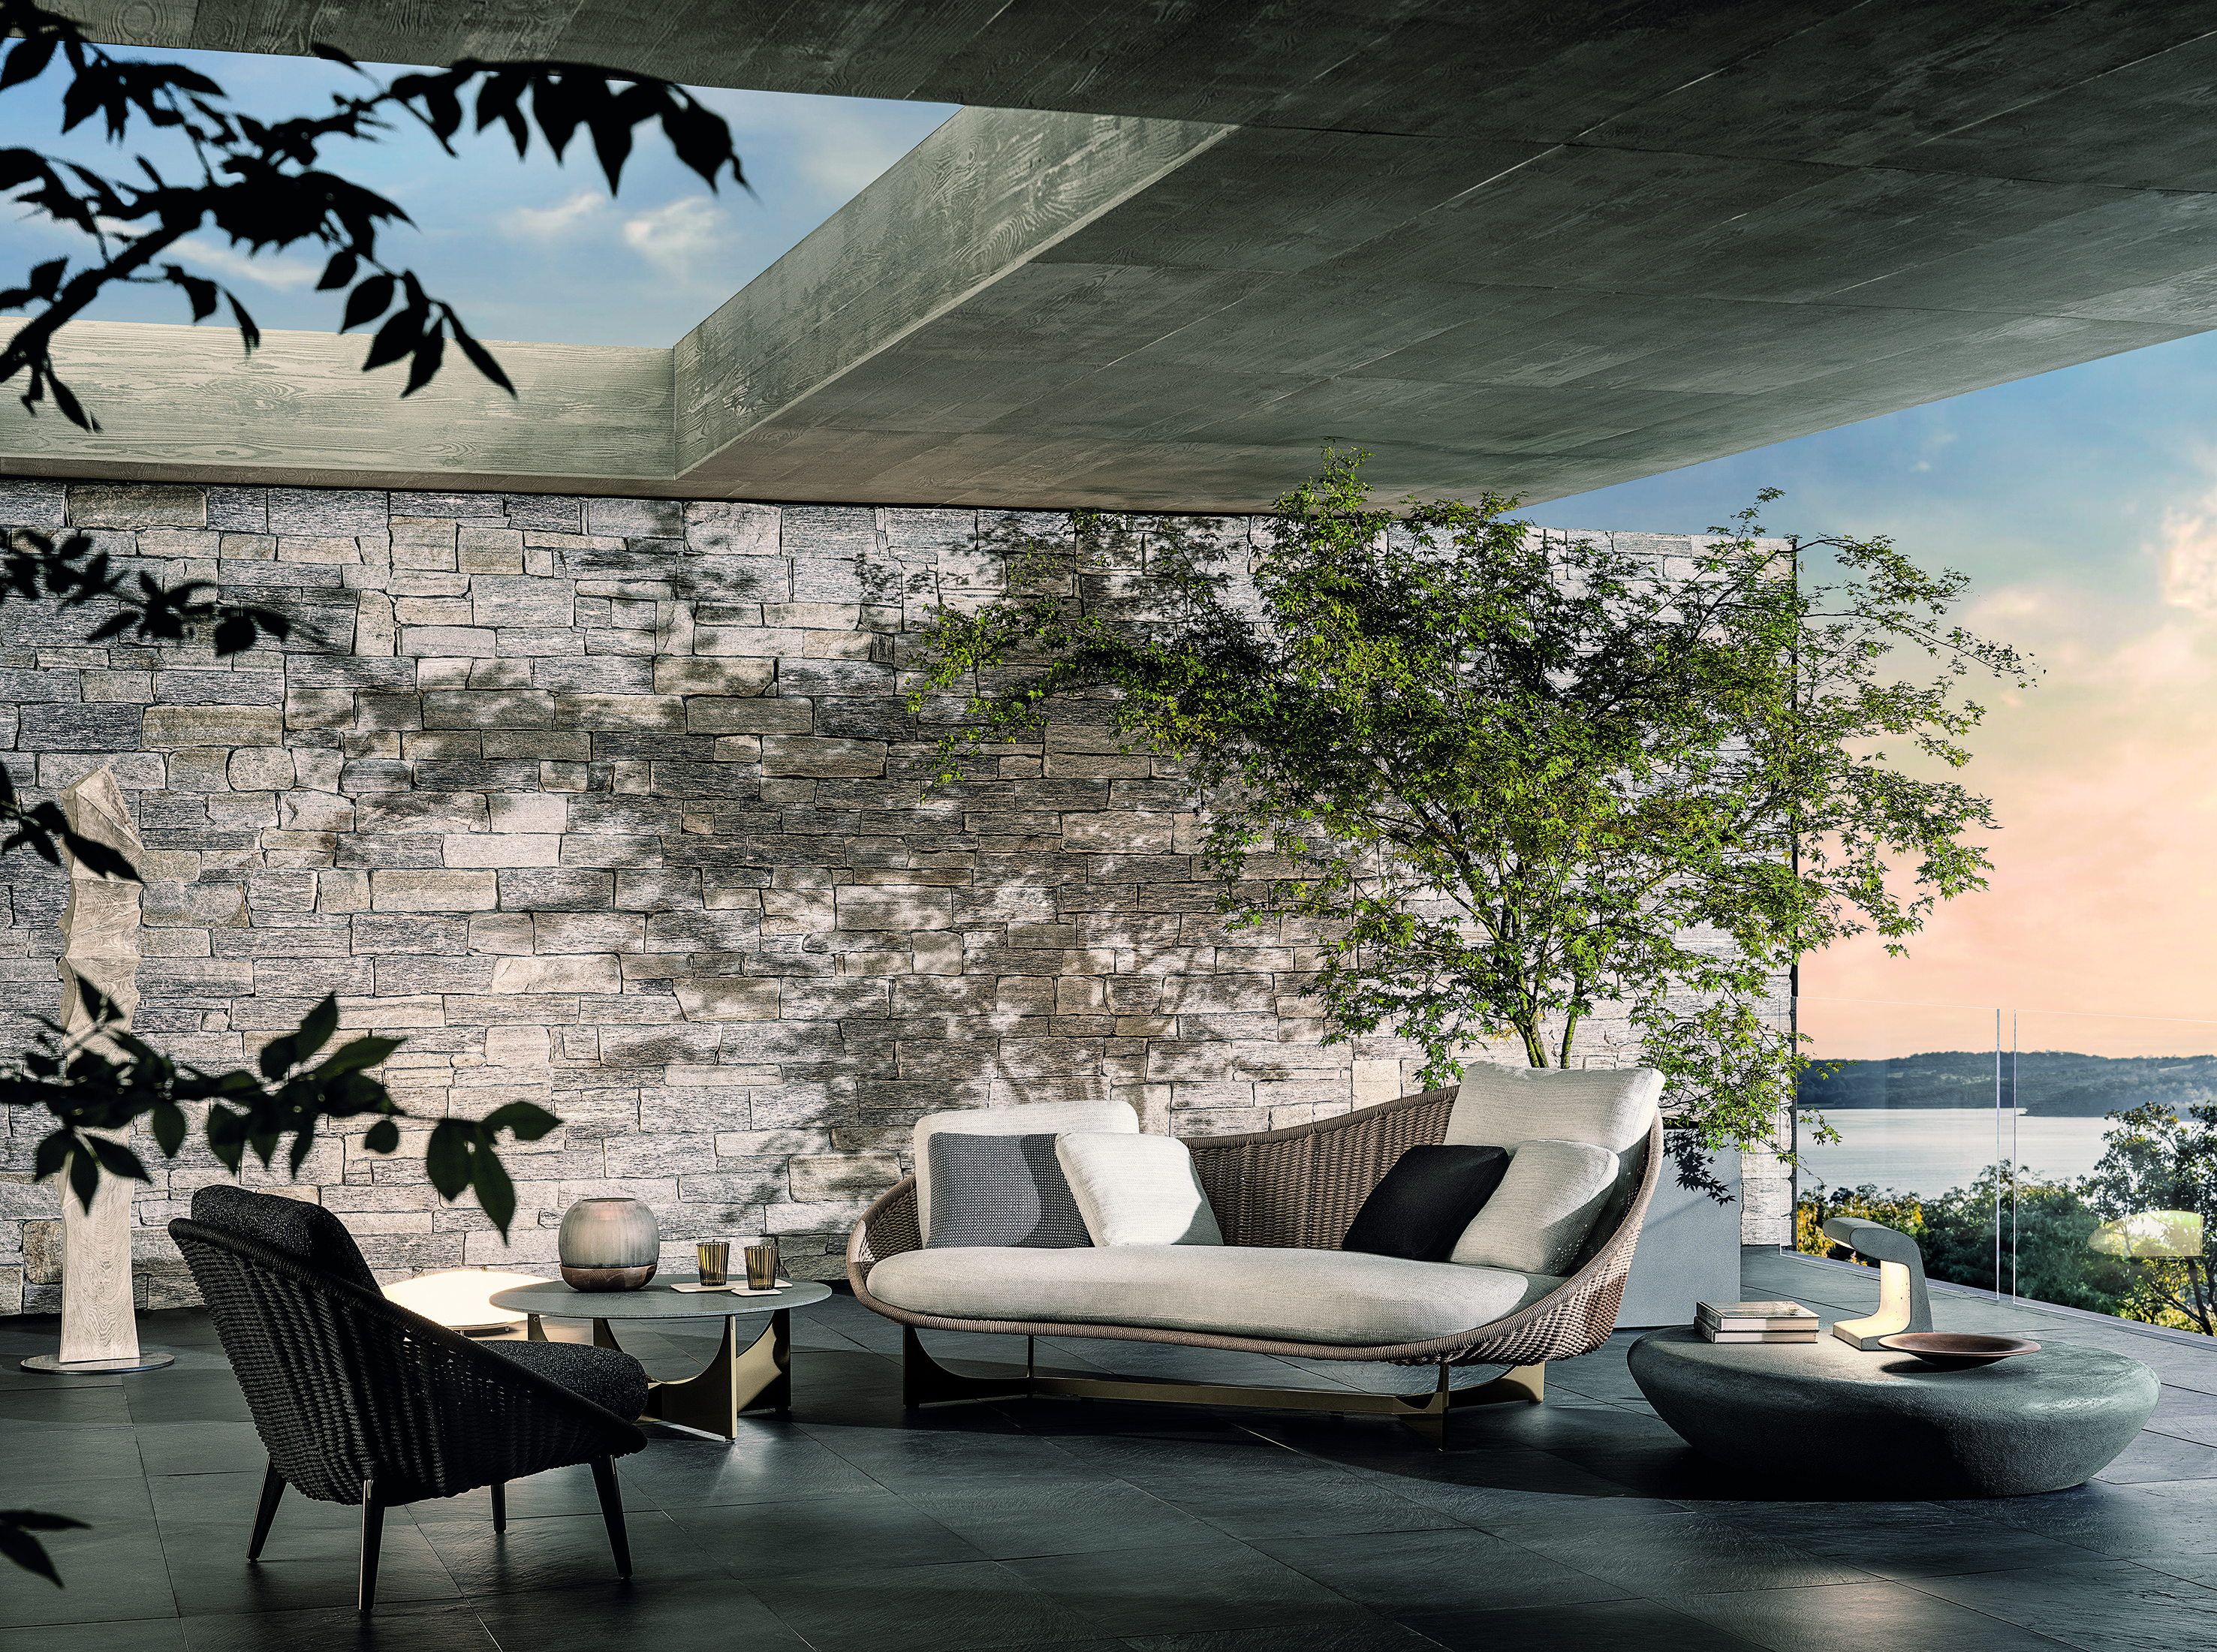 Andante showcases exclusive ART and full Minotti collection lido cord outdoor